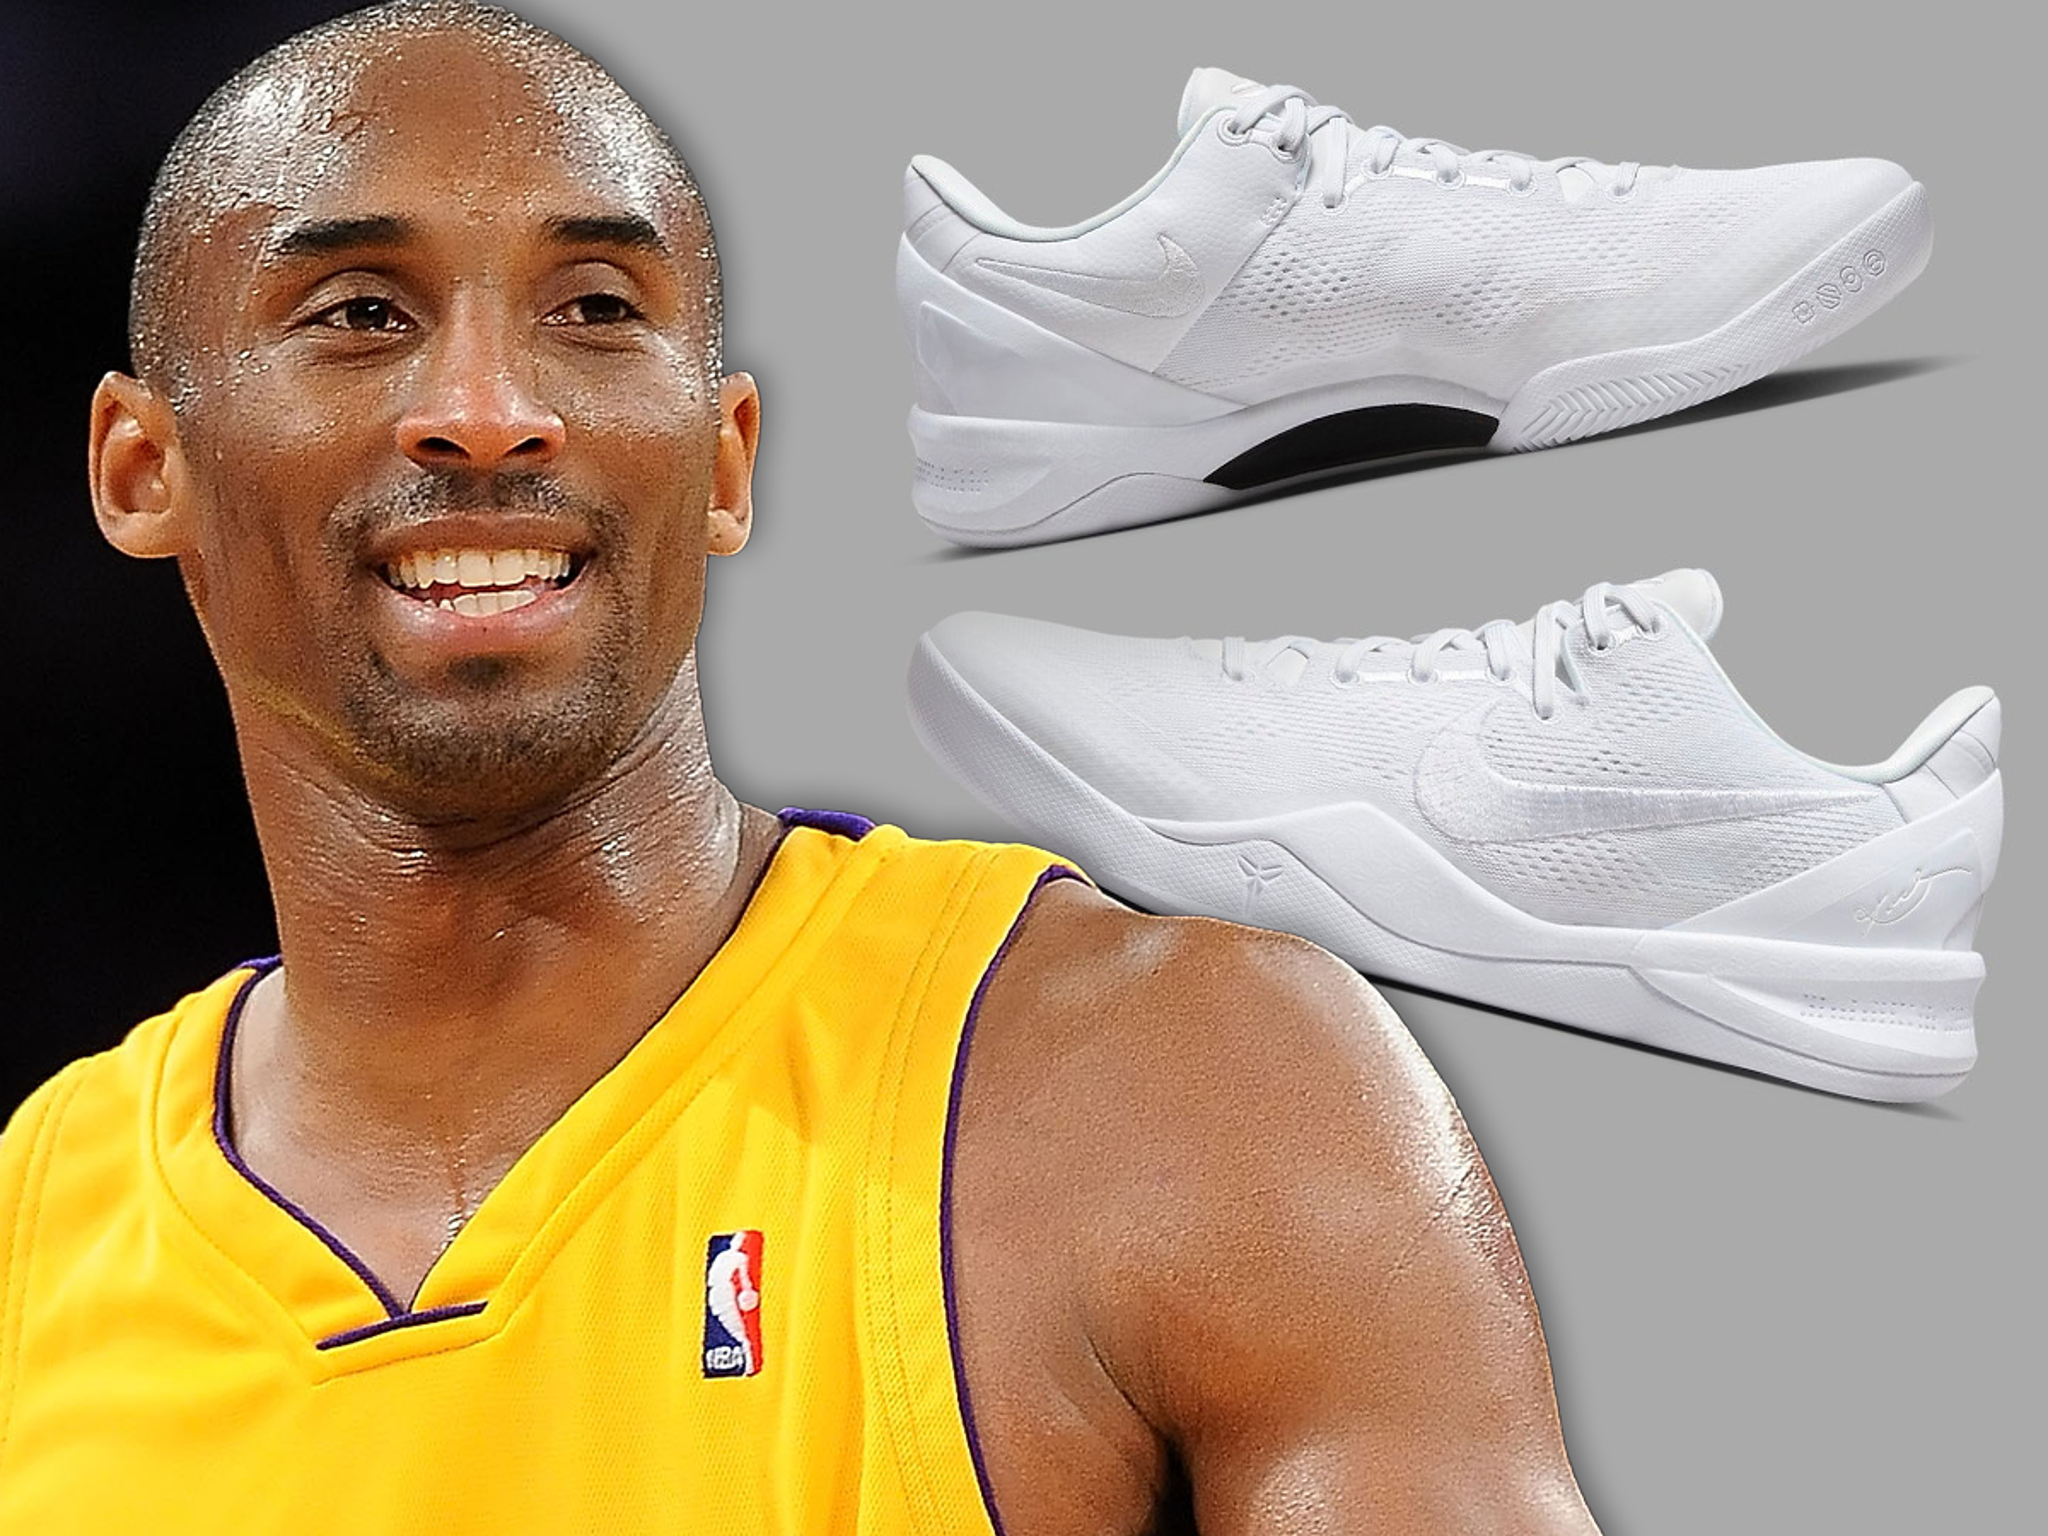 Kobe Bryant 8 'Halo' release date: When will Nike drop Lakers